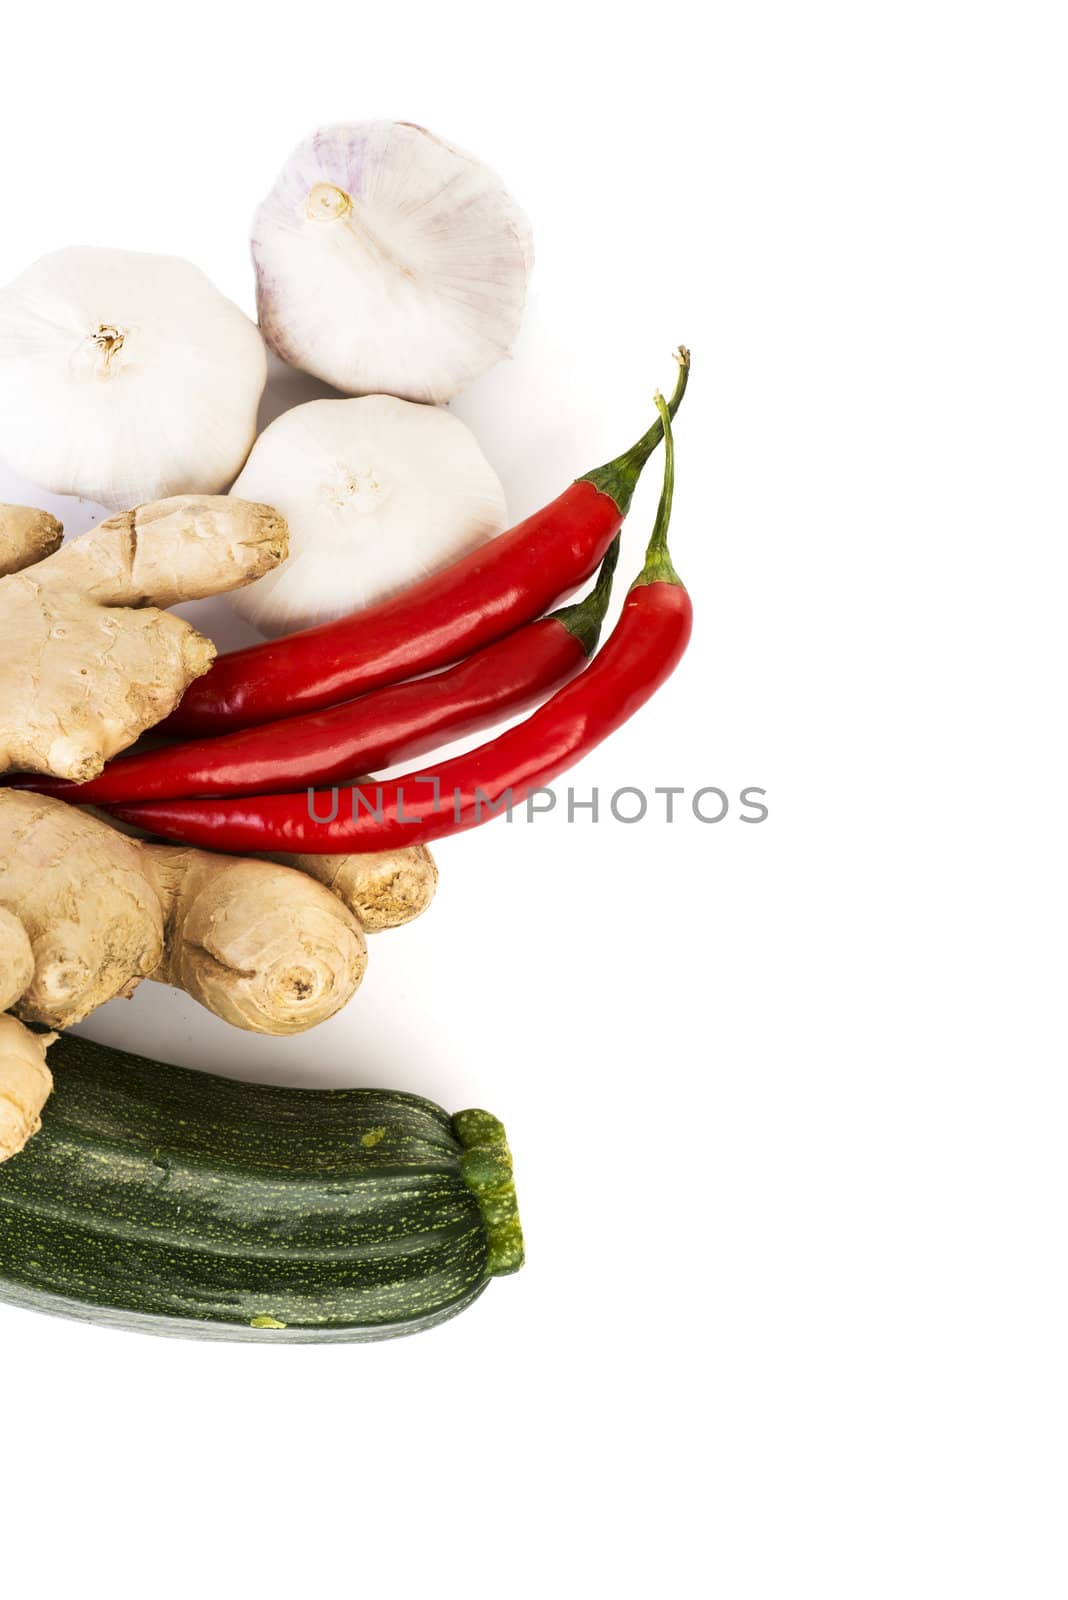 Zucchini, imbir,garlic and red hot chilie peppers over white background. Group of vegetables.